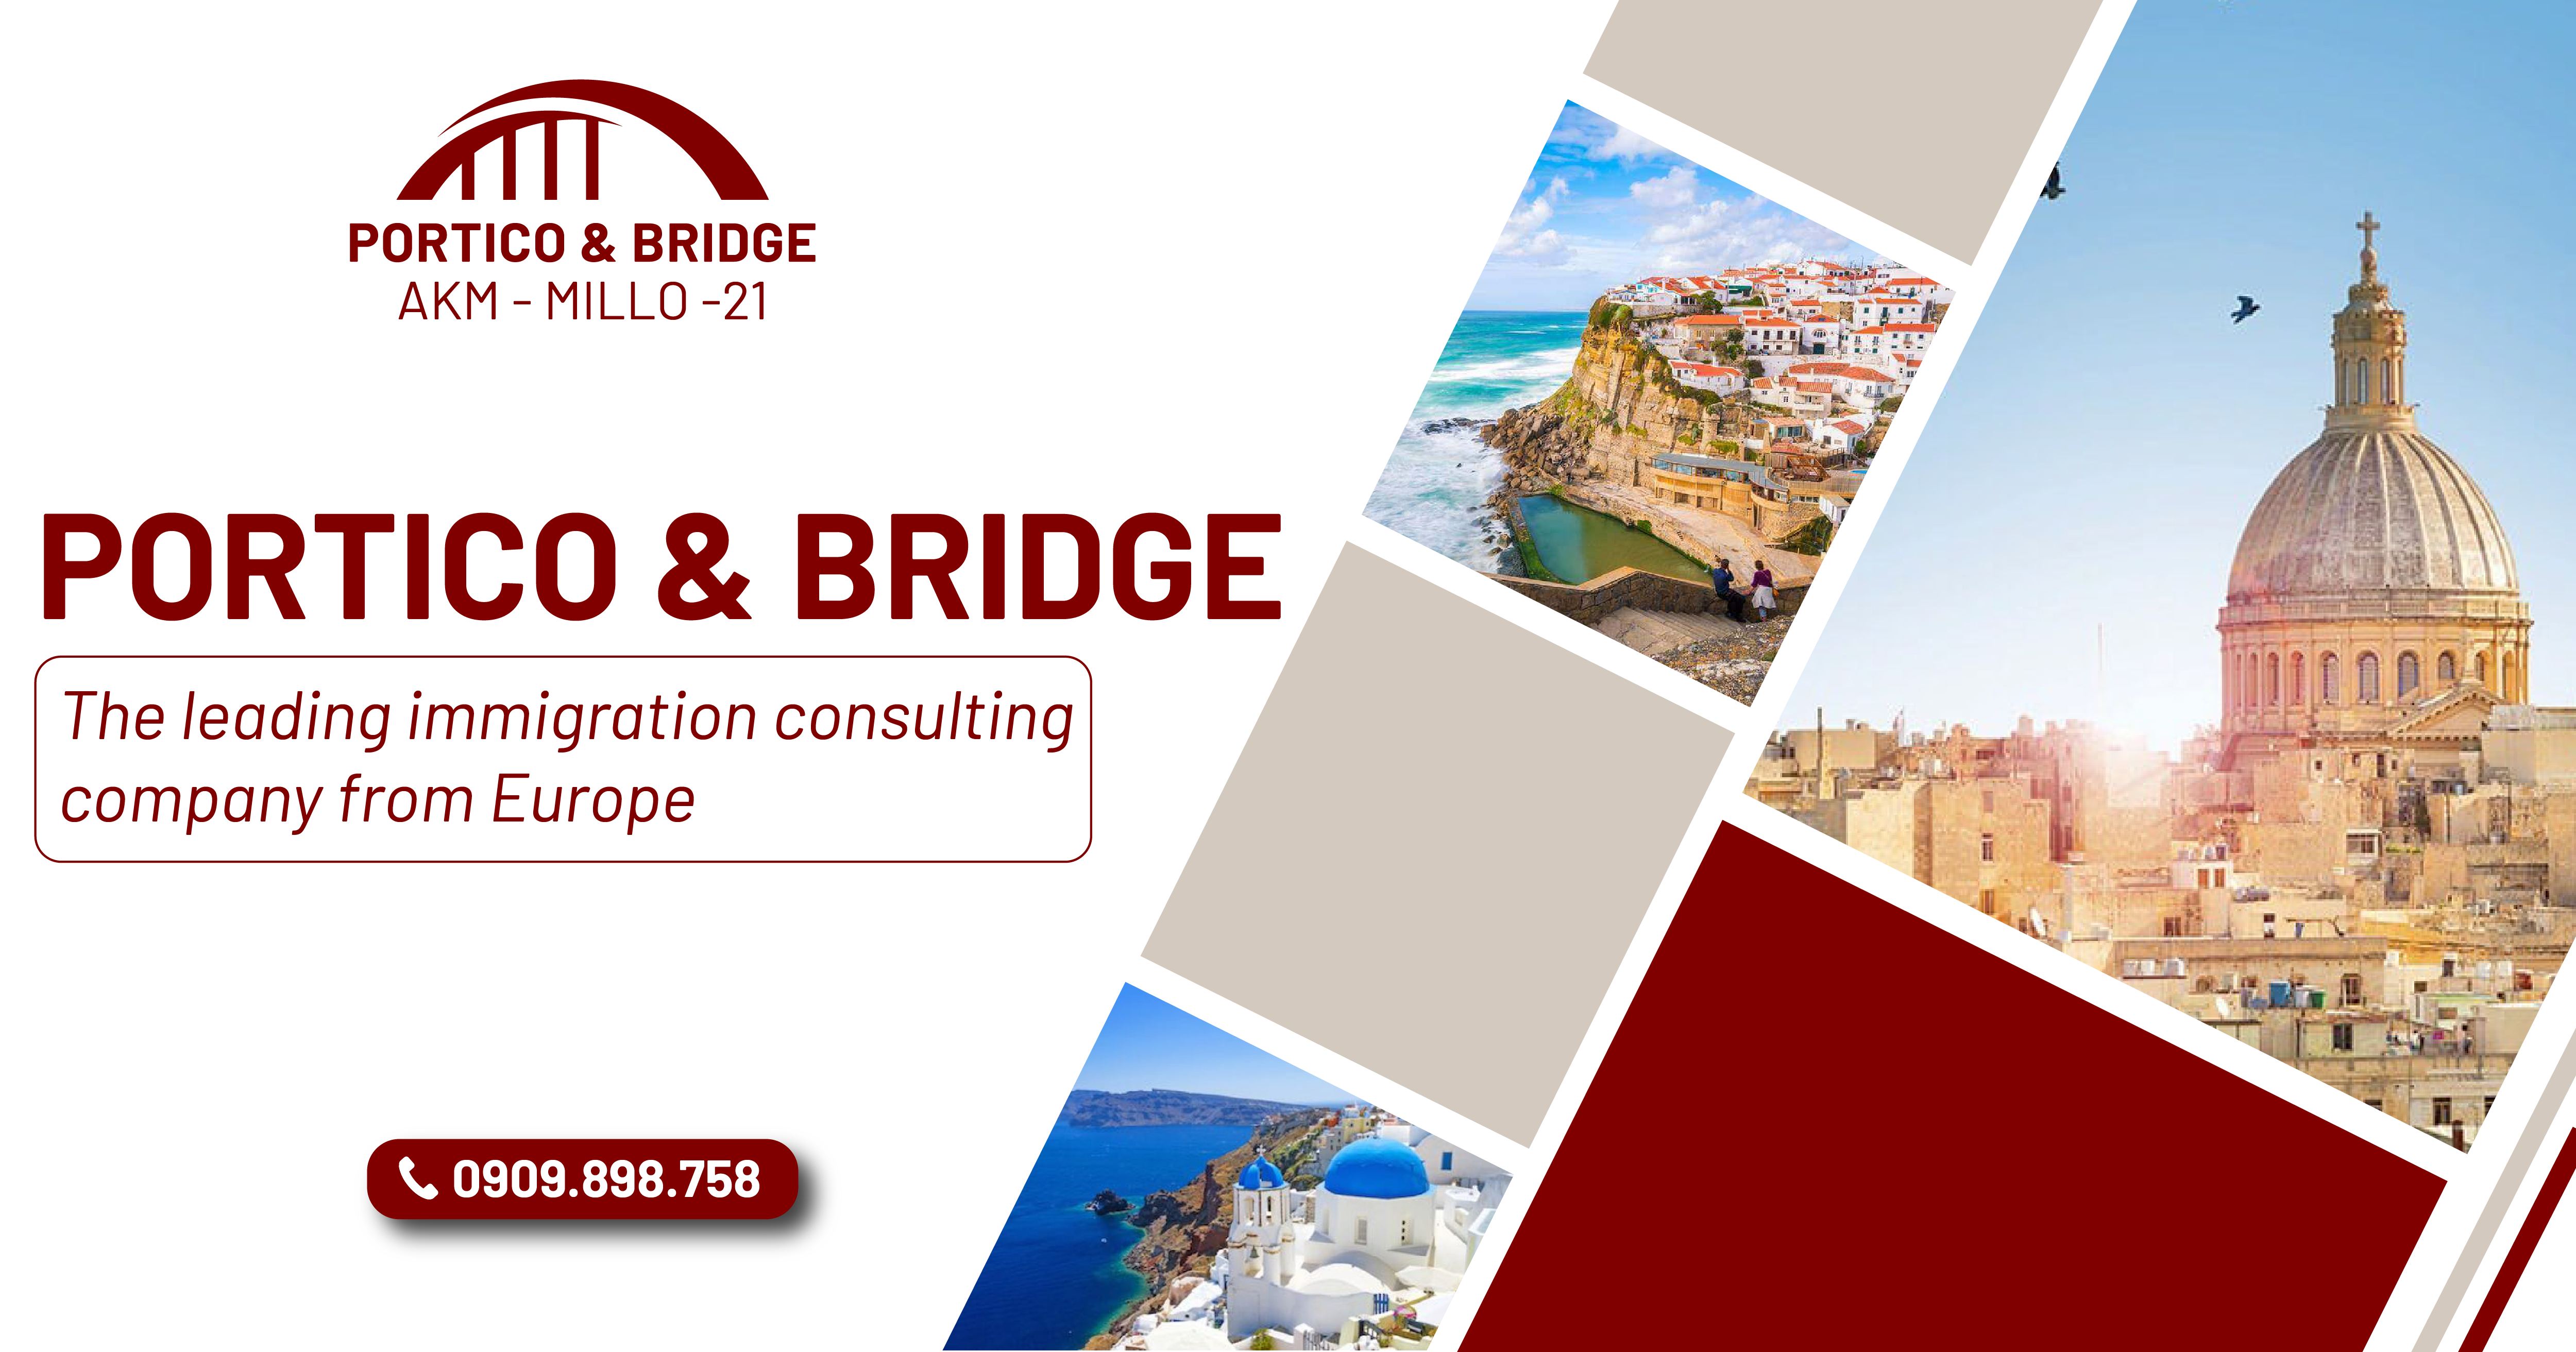 PORTICO & BRIDGE - the leading immigration consulting company from Europe